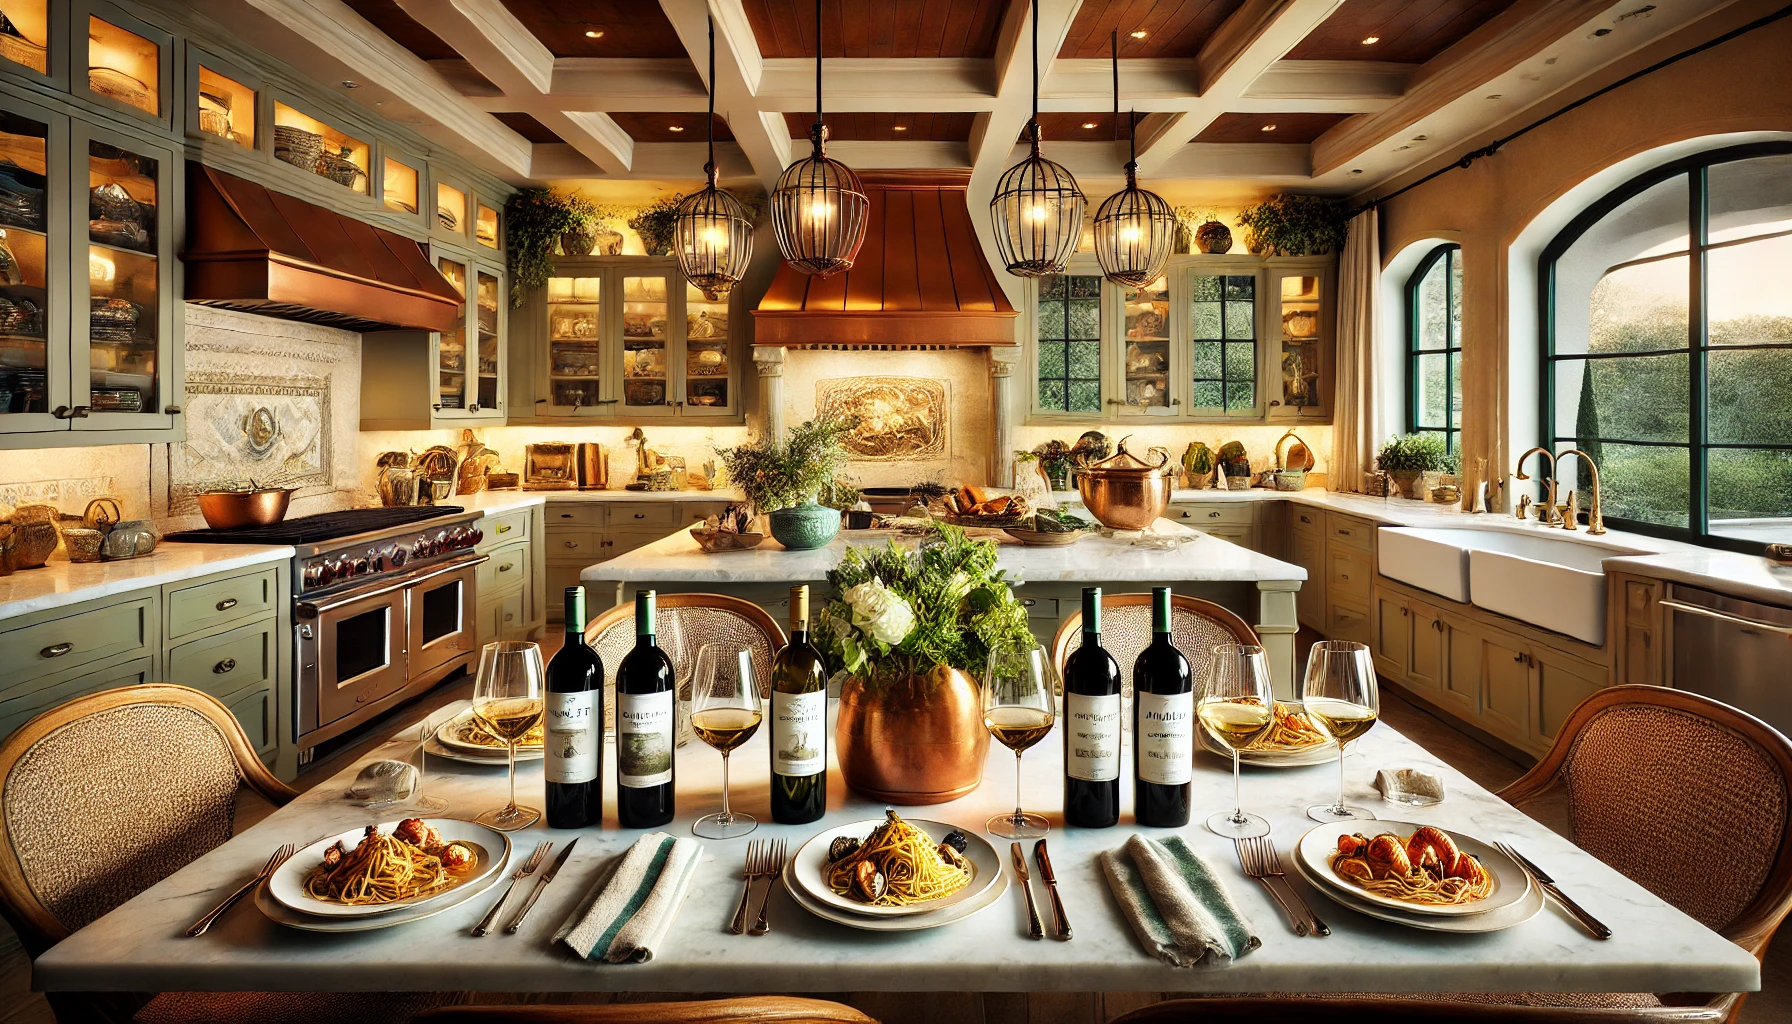 "Amalfi Wines" and seafood dishes set in Kathy Fields' beautifully designed California kitchen 